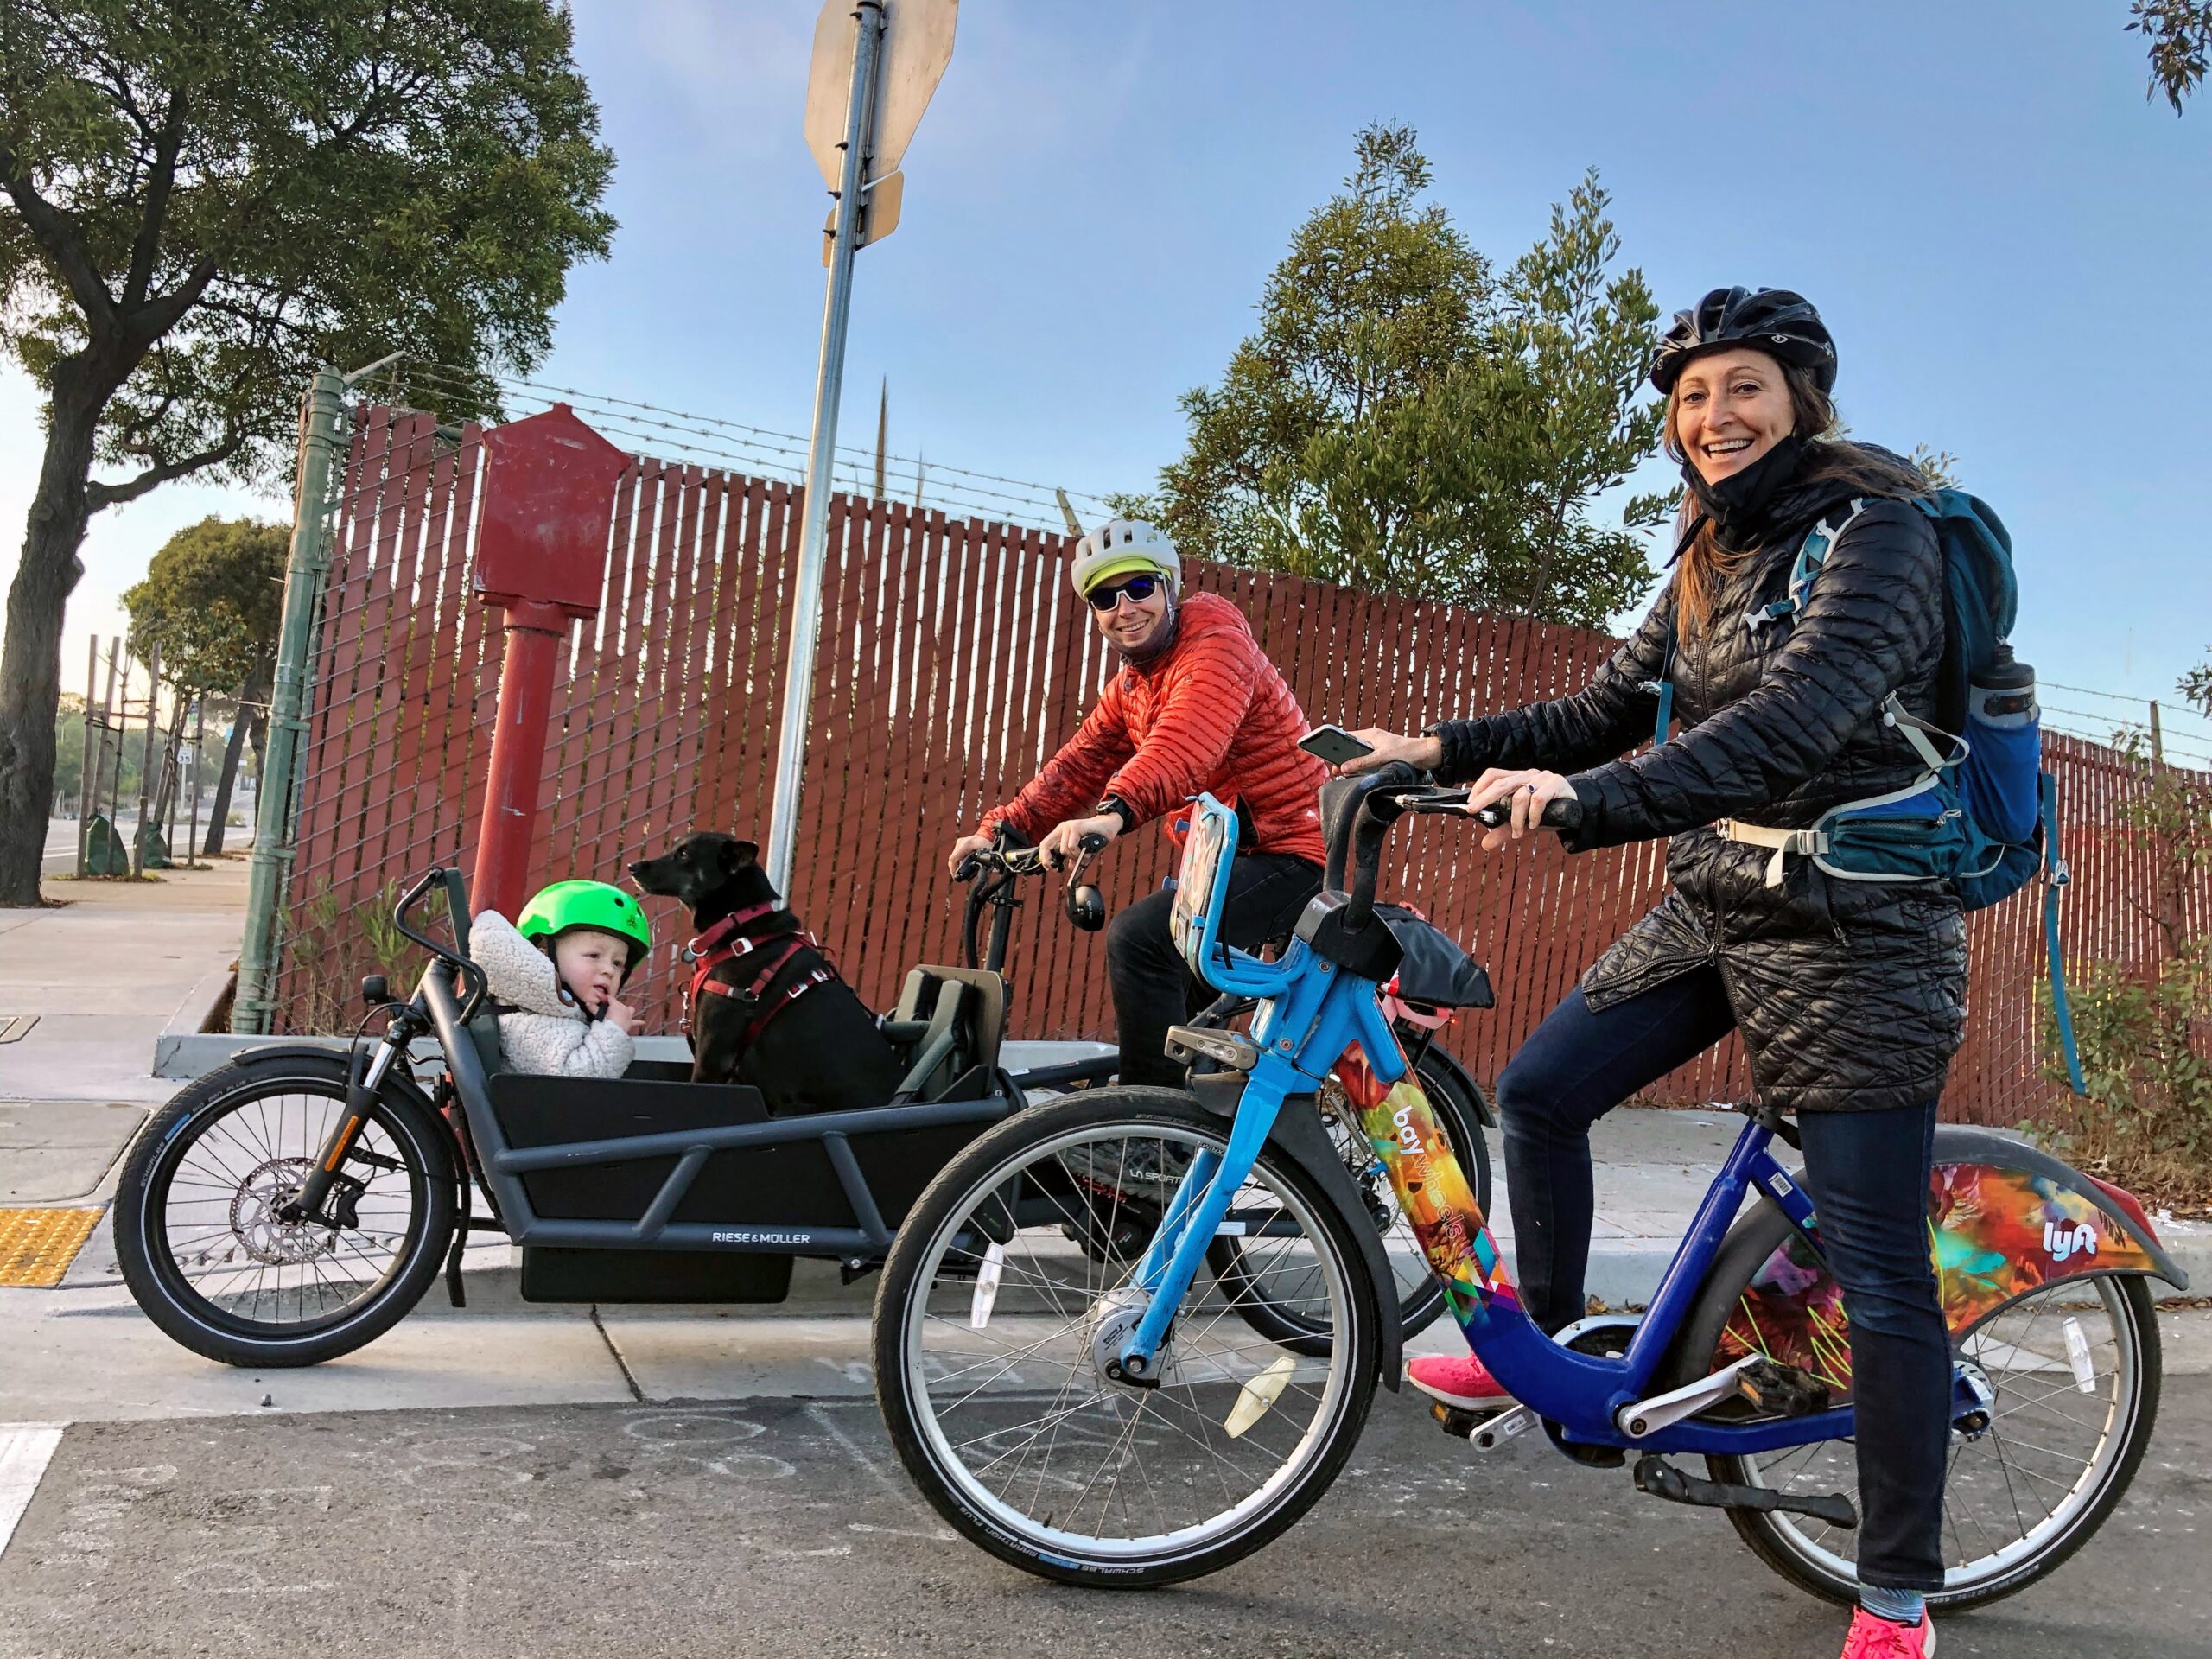 Tips for How To Rent an E-Bike in San Francisco